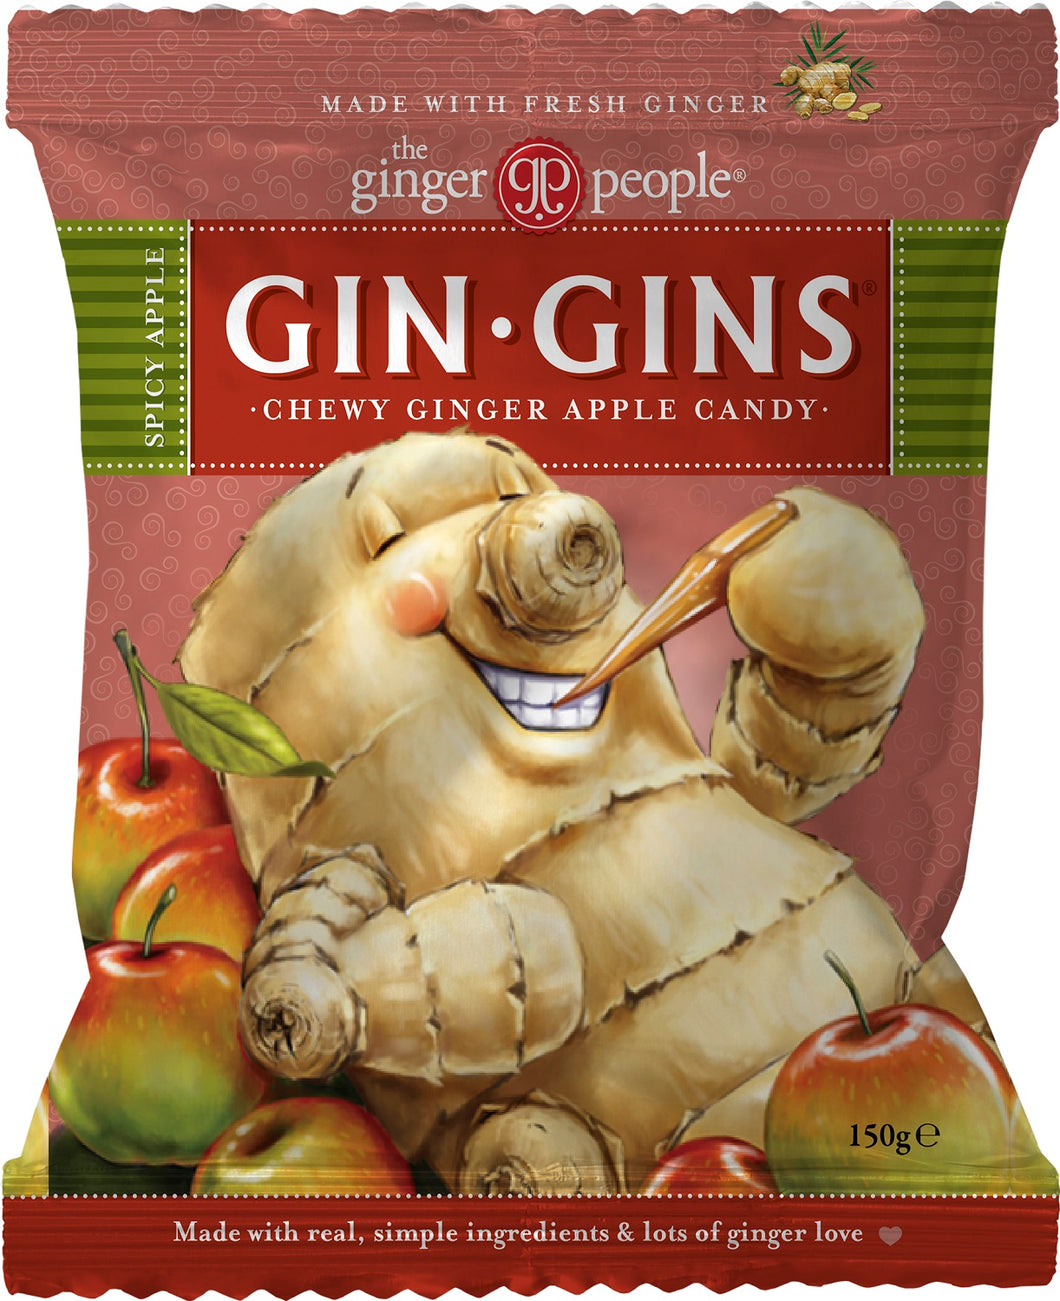 GIN GINS Apple Ginger Chew Candy 150g